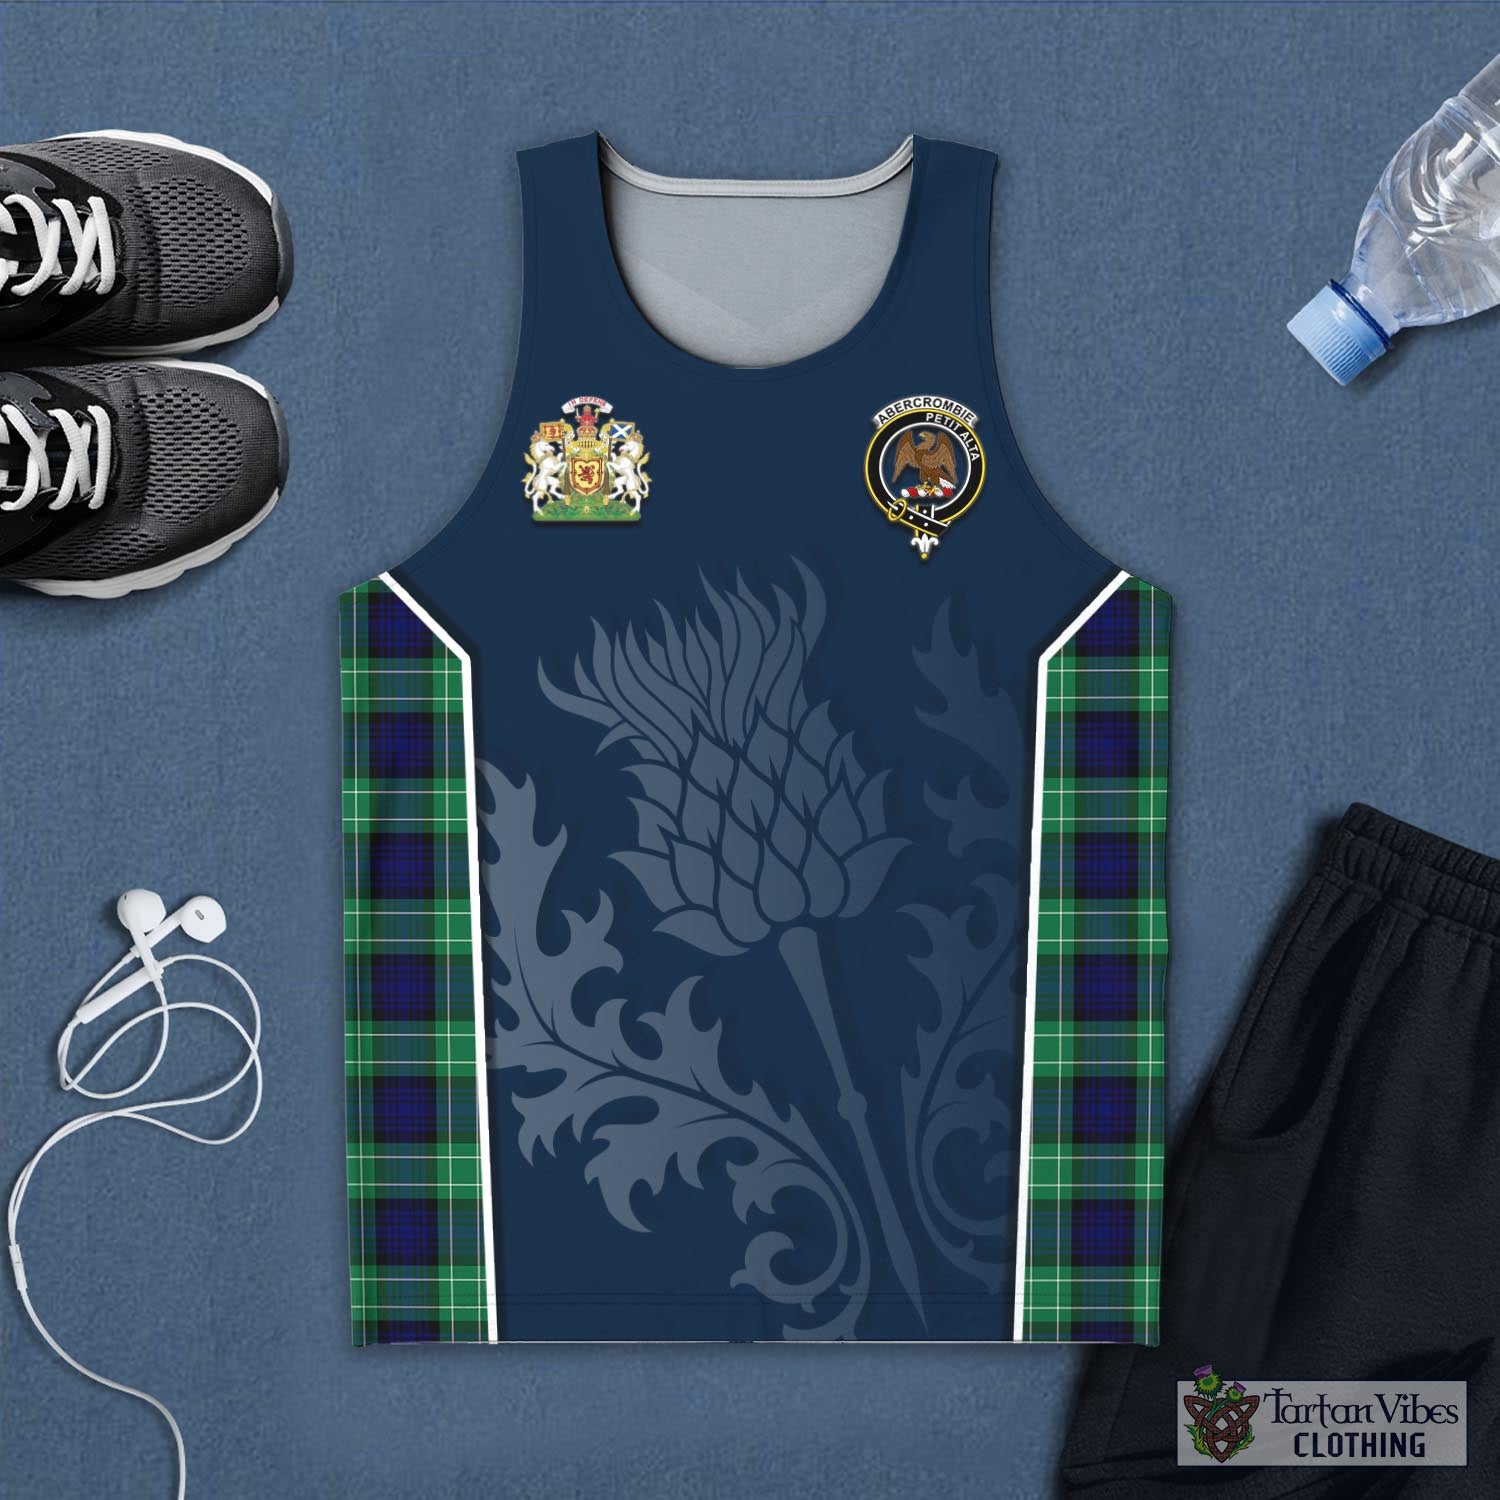 Tartan Vibes Clothing Abercrombie Tartan Men's Tanks Top with Family Crest and Scottish Thistle Vibes Sport Style